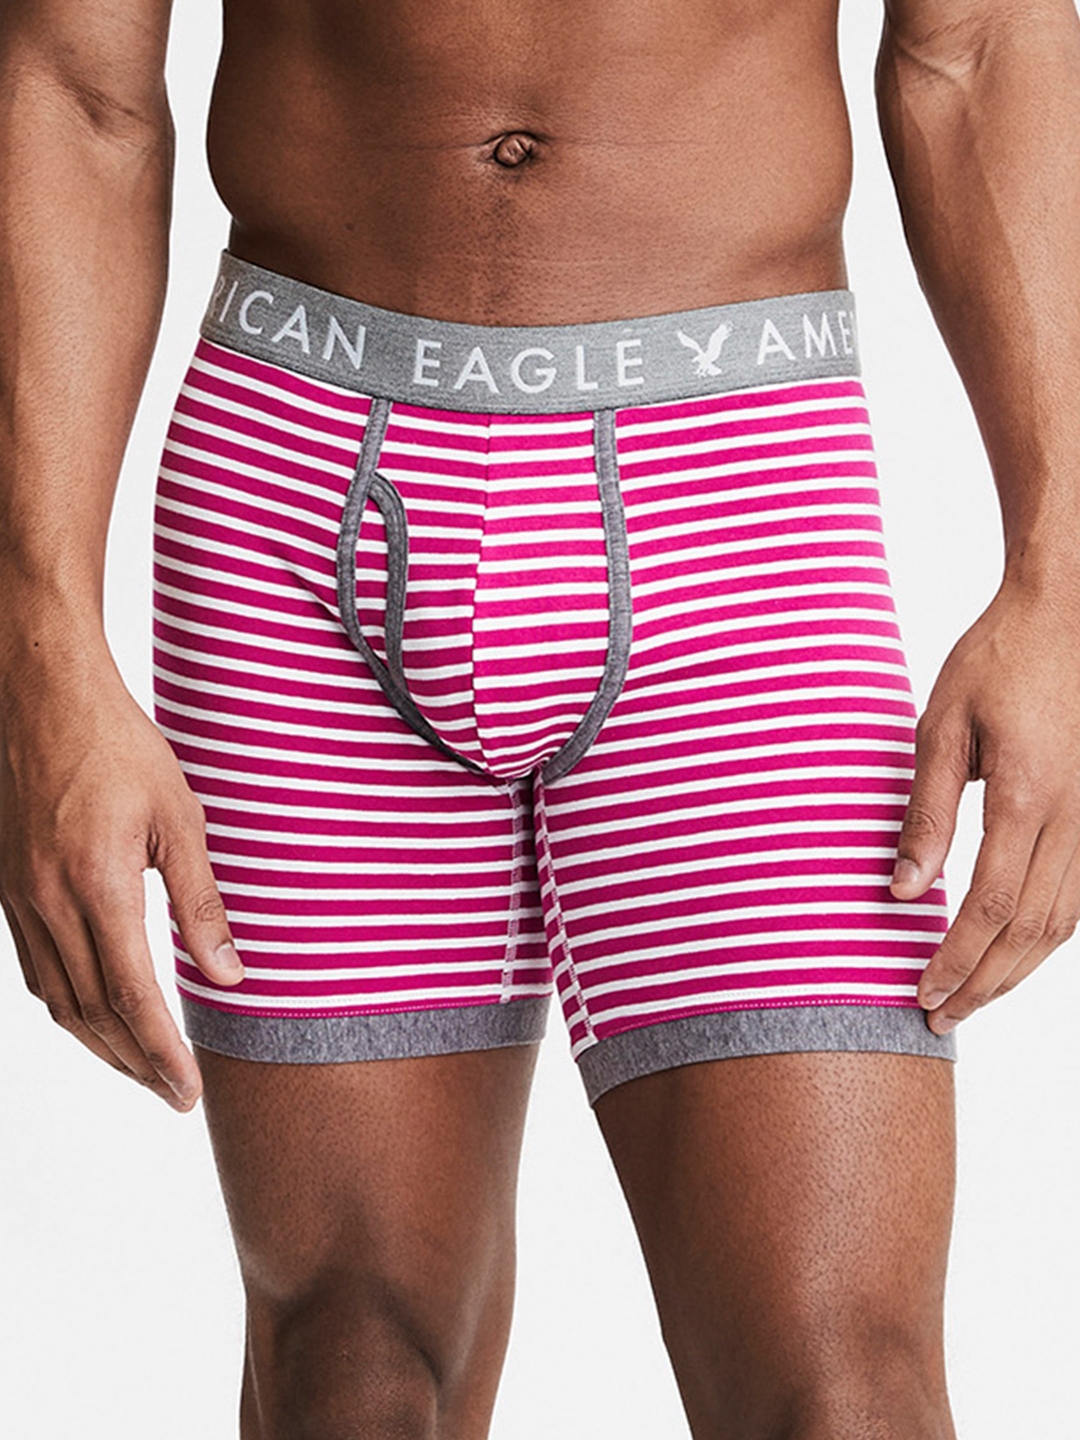 American Eagle AEO Boxer Brief Underwear 3 and 29 similar items